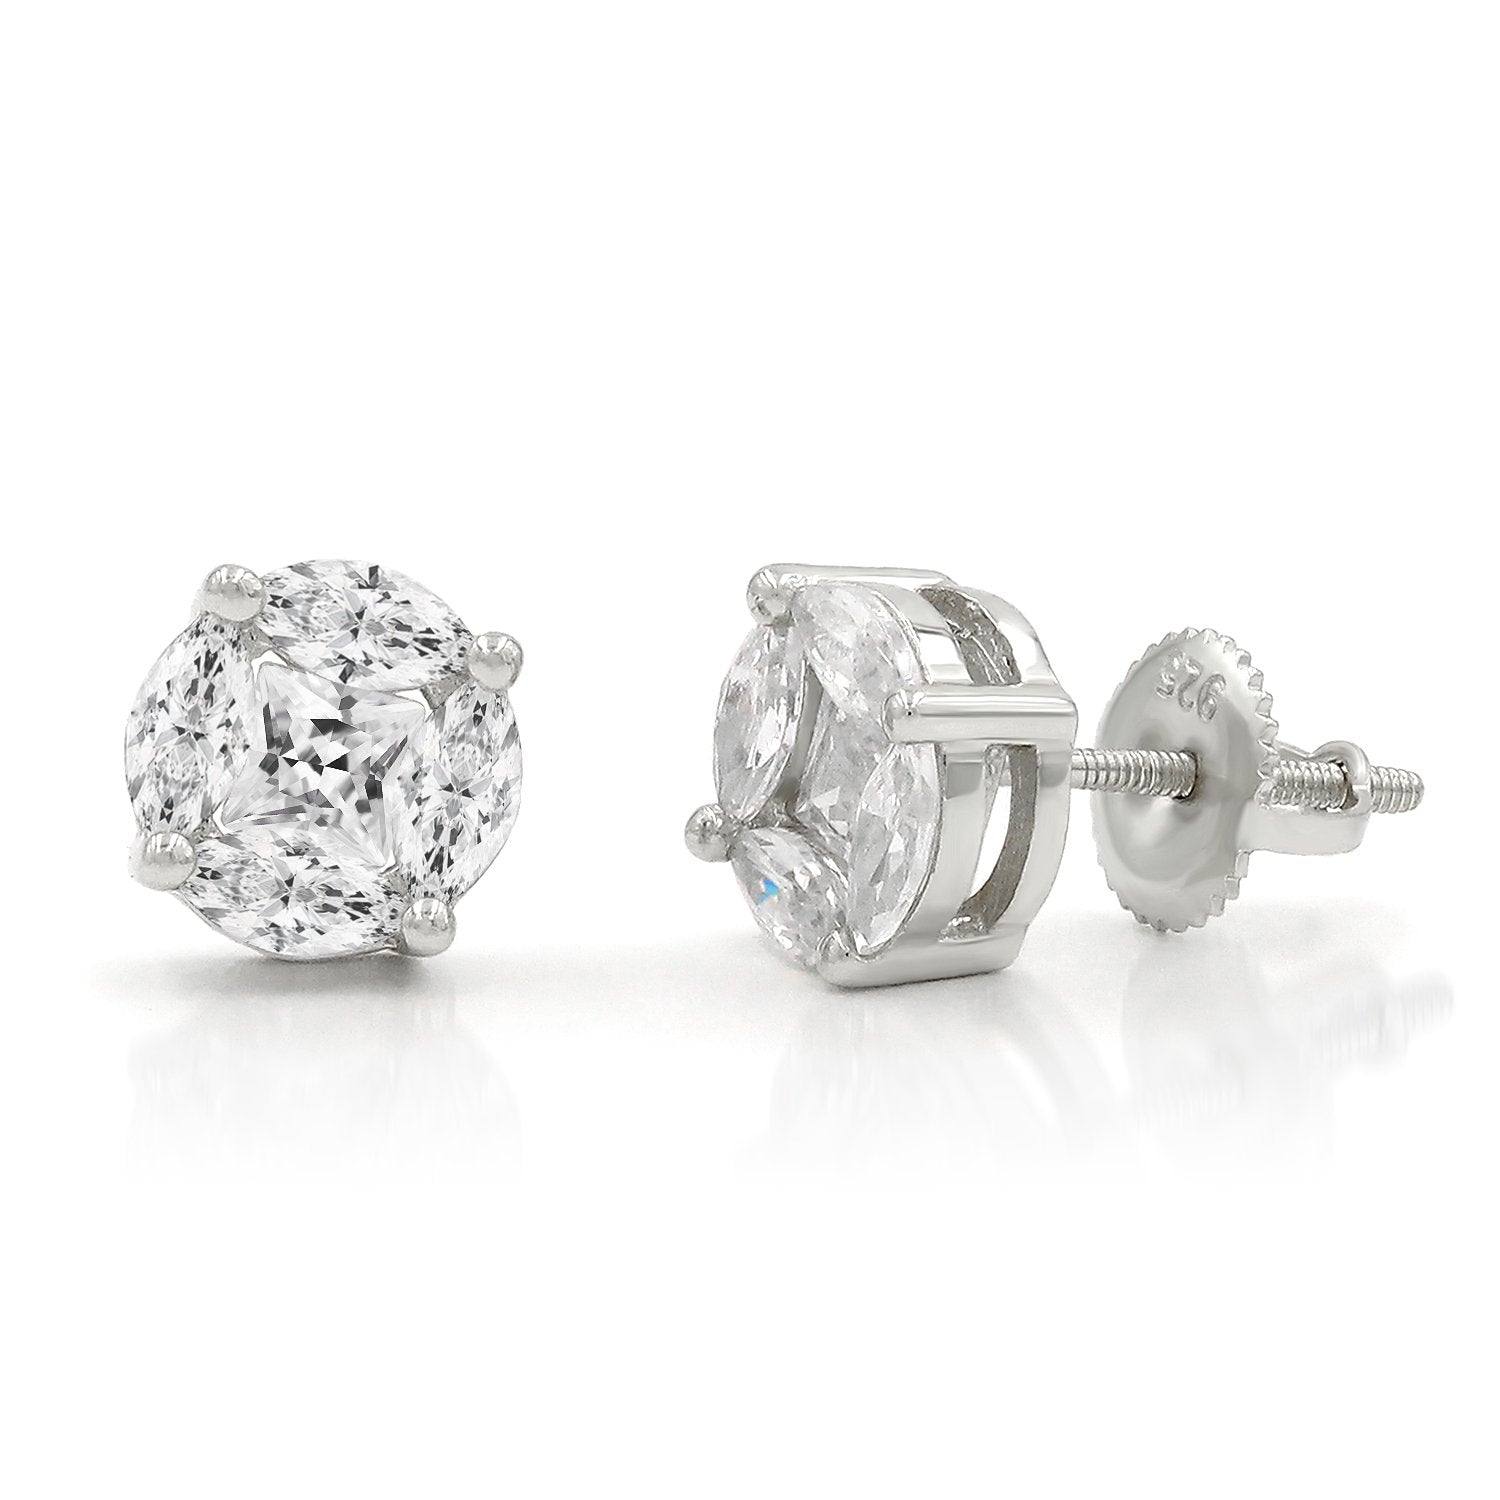 925 Sterling Silver Micro Pave Unisex Round Marquise & Princess Cut Screw Back Stud Earrings